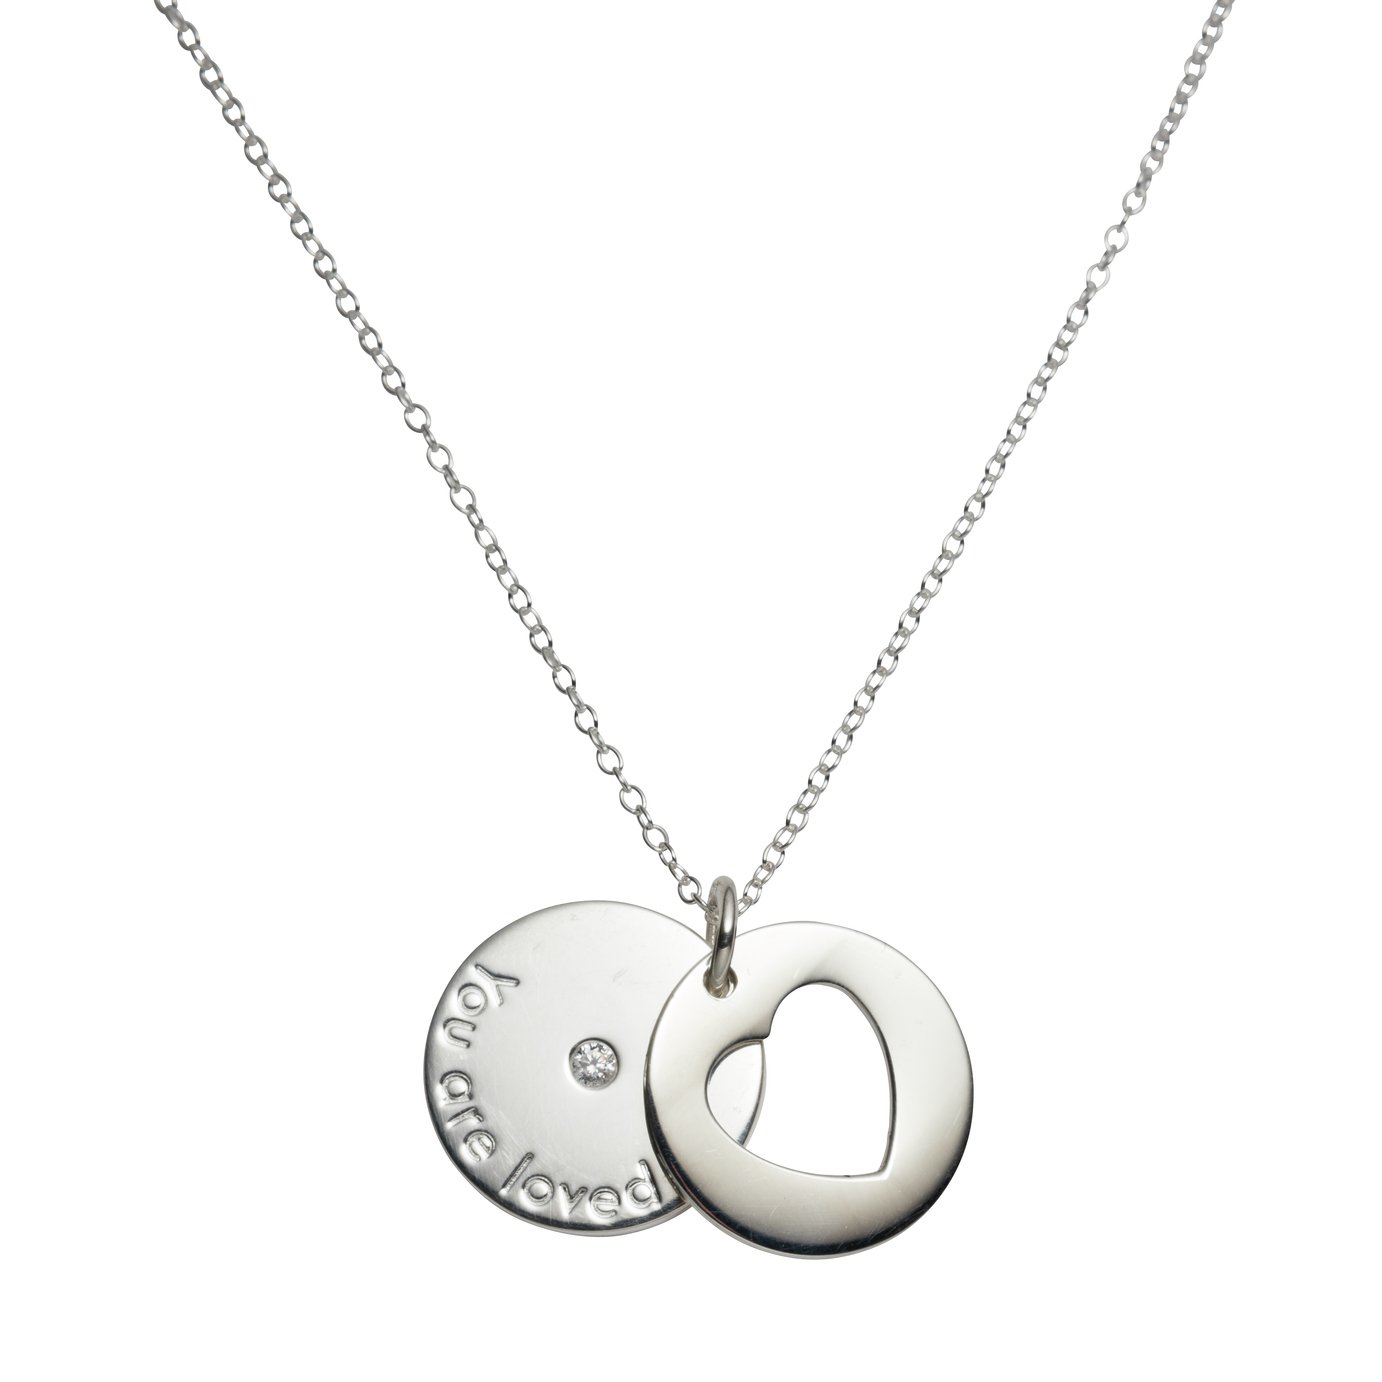 Moon & Back Sterling Silver Cubic Zirconia Pendant Necklace